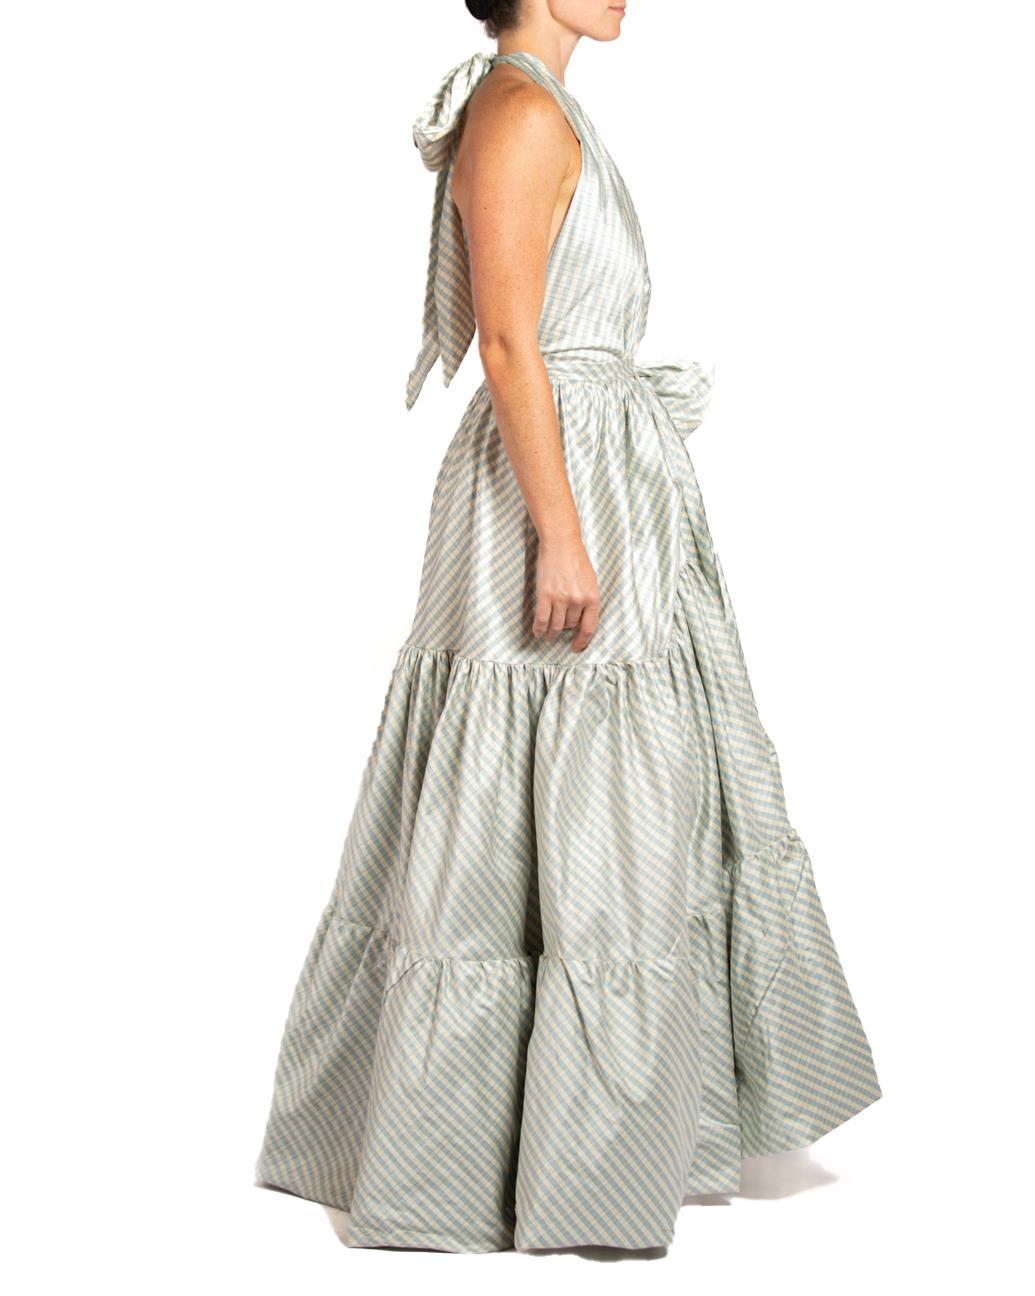 MORPHEW COLLECTION Cream & Blue Silk Taffeta Plaid Gown In Excellent Condition For Sale In New York, NY